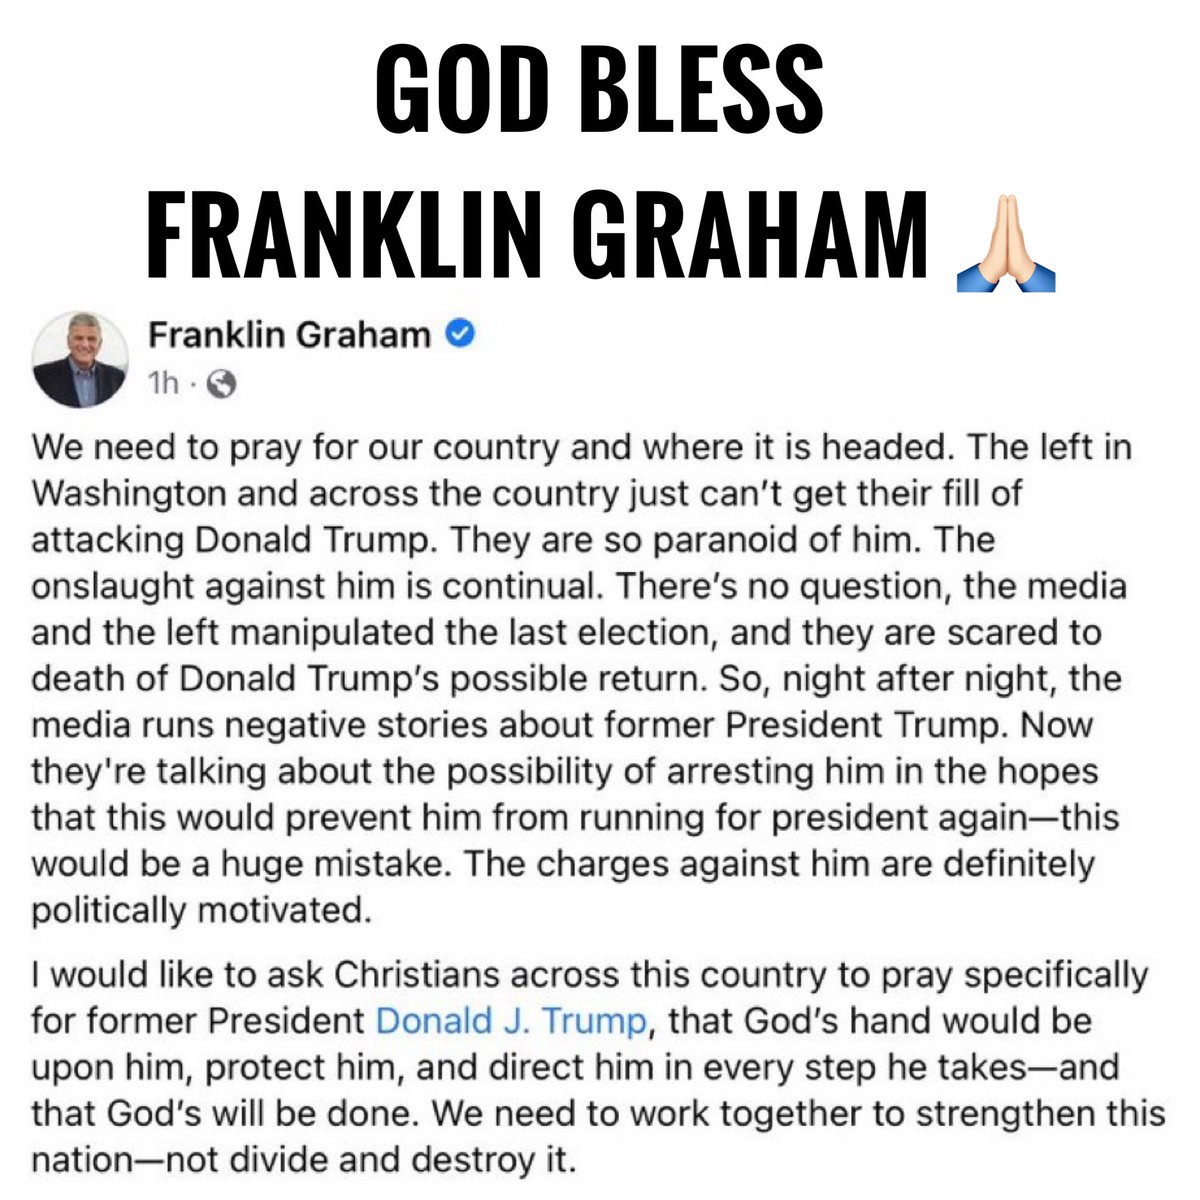 God Bless, Franklin Graham for calling on all Christians to PRAY for President Trump and his family. 🙏🏻